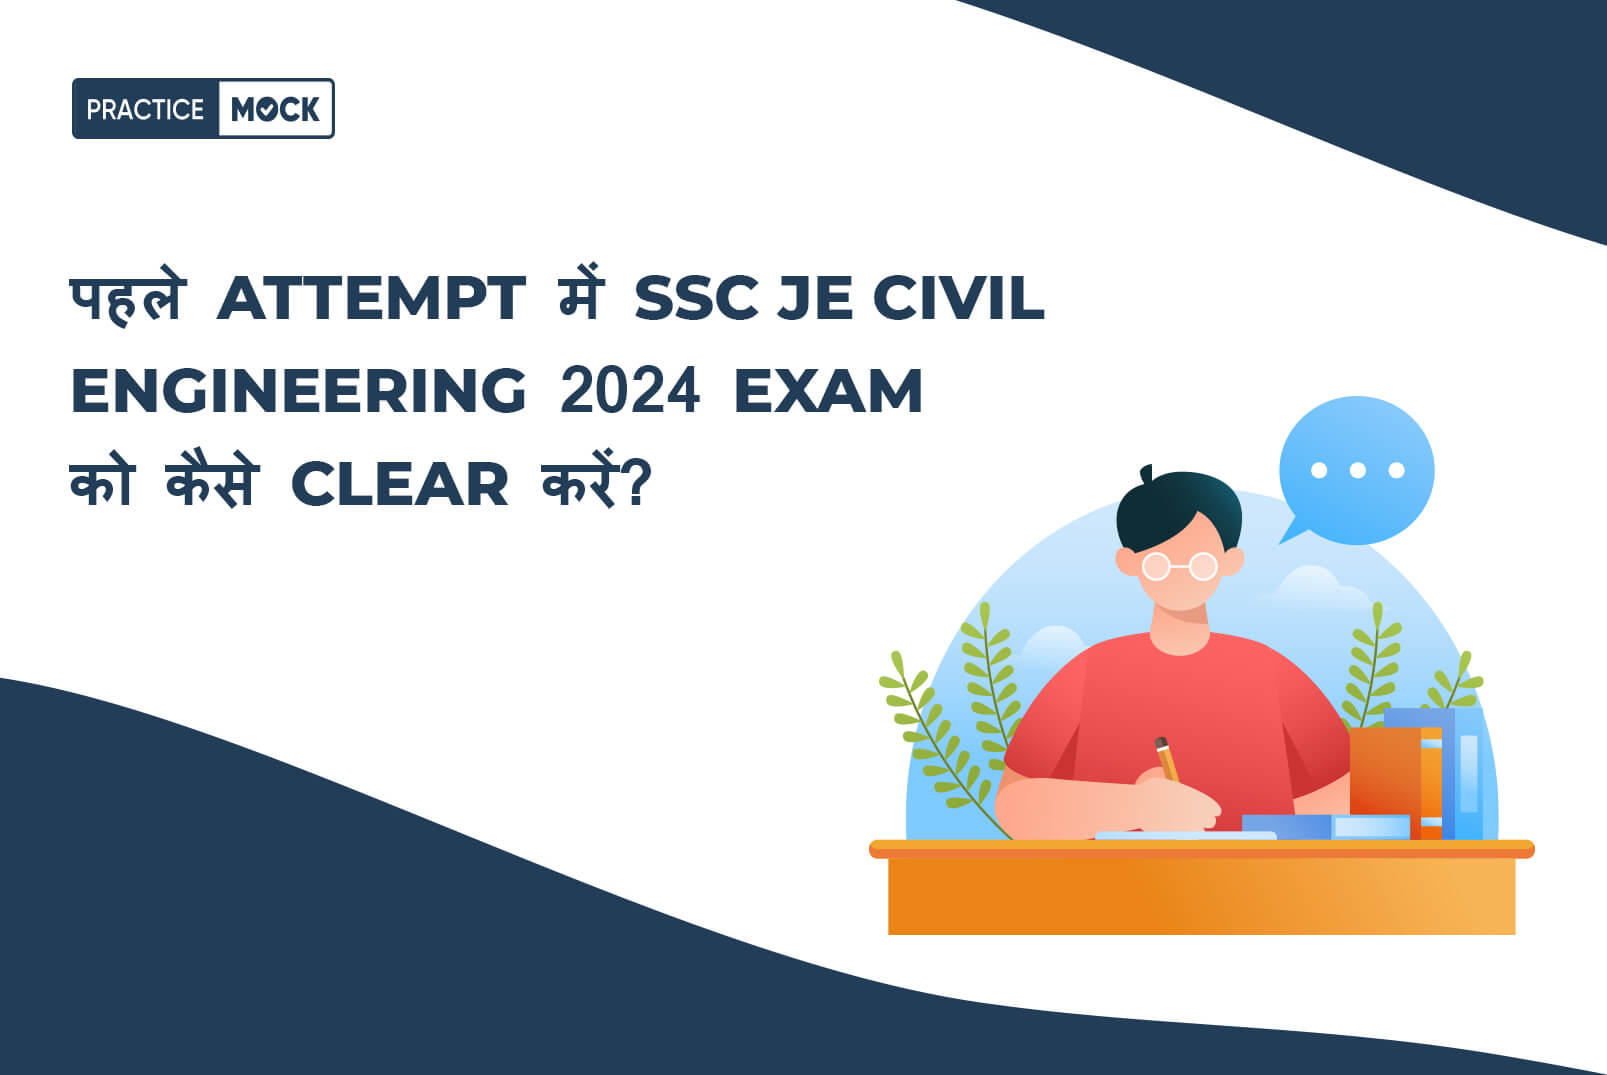 How to Clear the SSC JE Civil Engineering 2024 Exam in the First Attempt